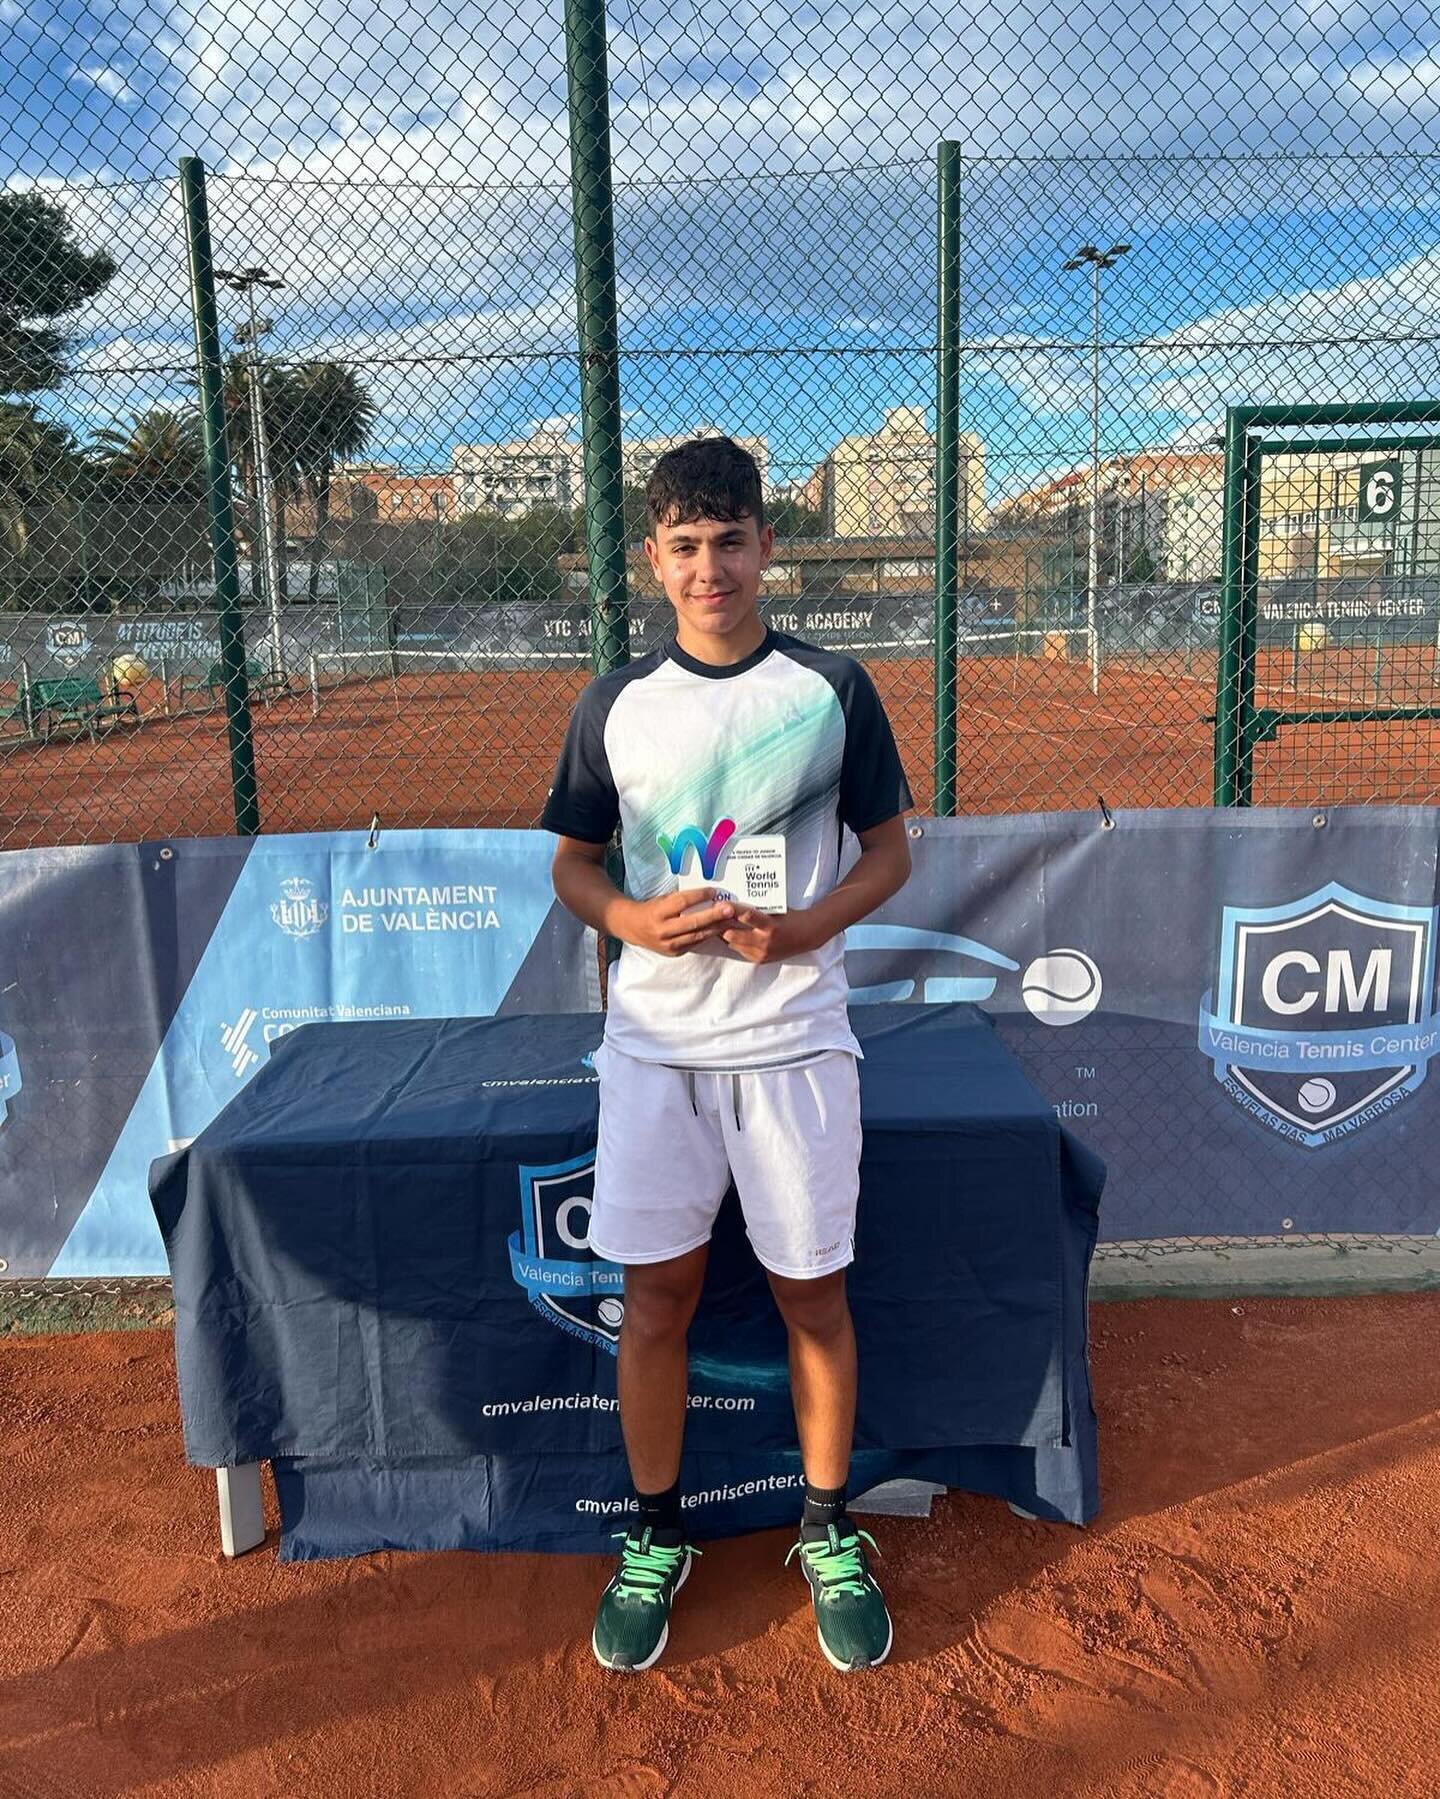 Titles from this week🏆

Andreas Timini defeats Samuele Seghetti in J200 finals with 6-2 6-3 🏆

Andreas Timini and Ludvig Hede won doubles finals together in J200 Valencia🏆 

Dovas Dersonas runner-up in J30 Kramfors🥈

Congratulations to you and yo